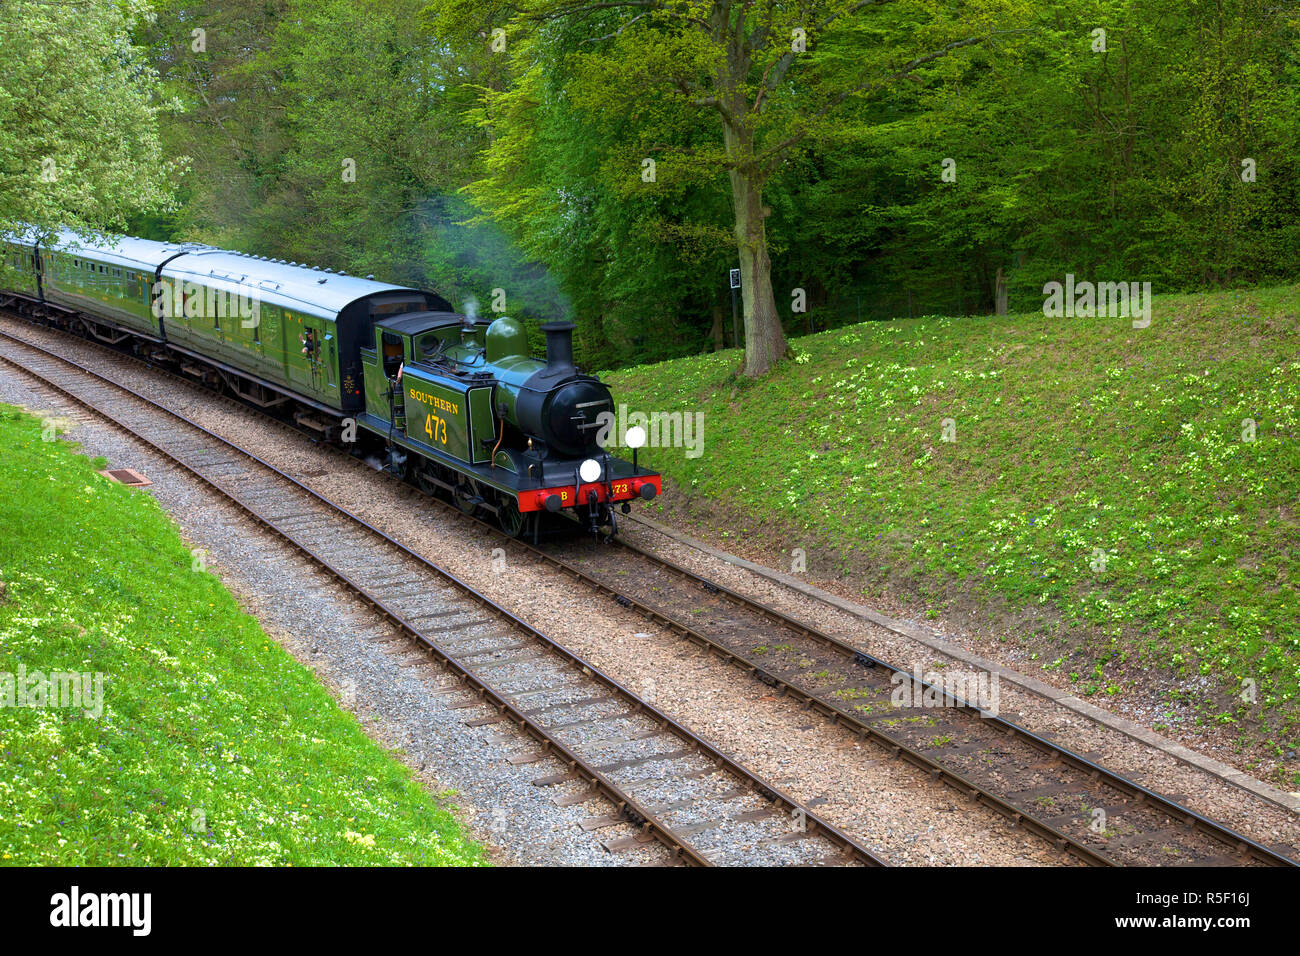 Steam Train on Bluebell Railway, Horsted Keynes, West Sussex, England, UK Stock Photo